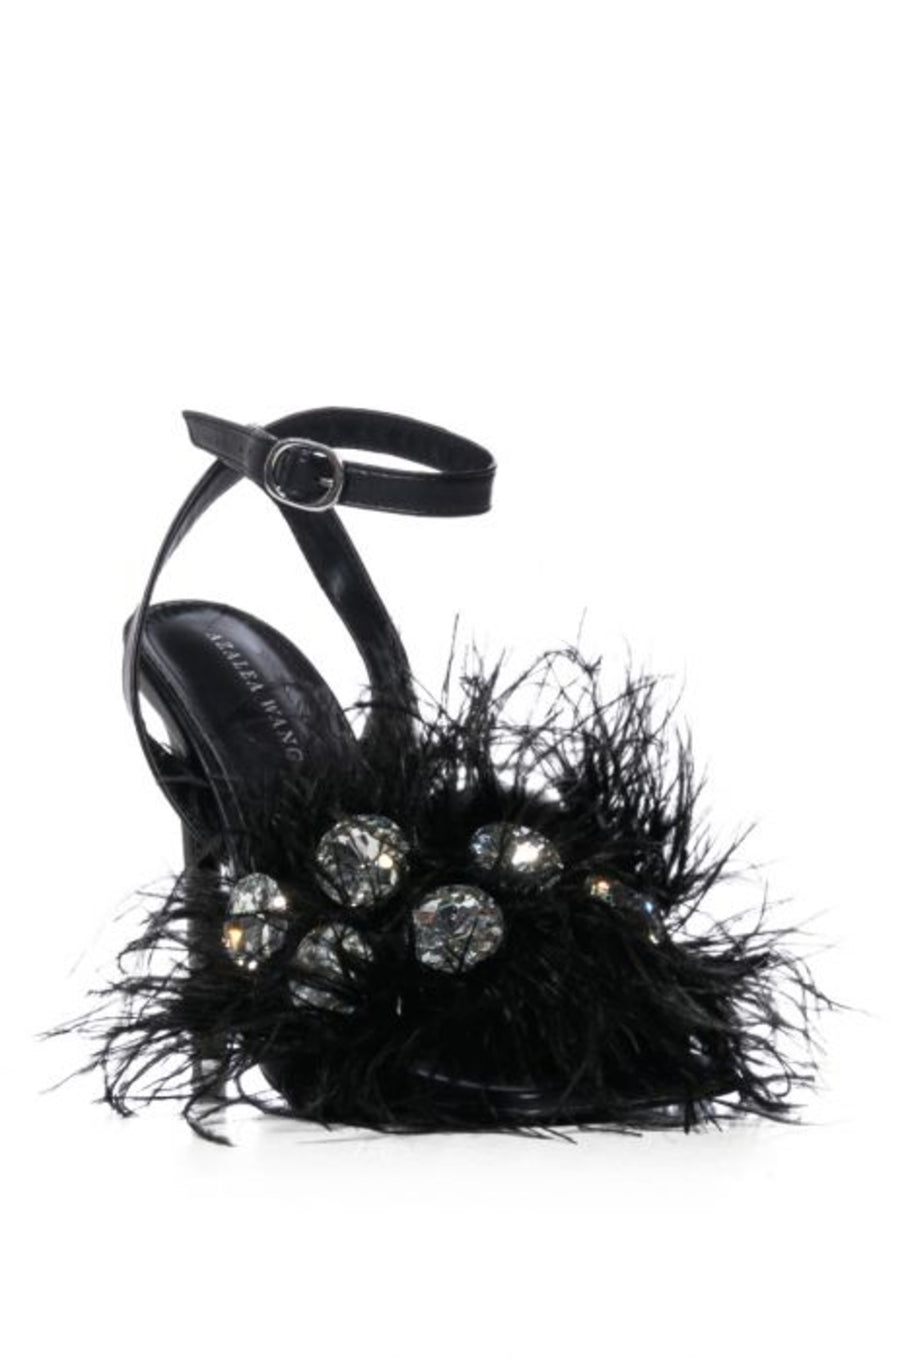 black open toe stiletto heels with an adjustable ankle strap and feather and rhinestone detail